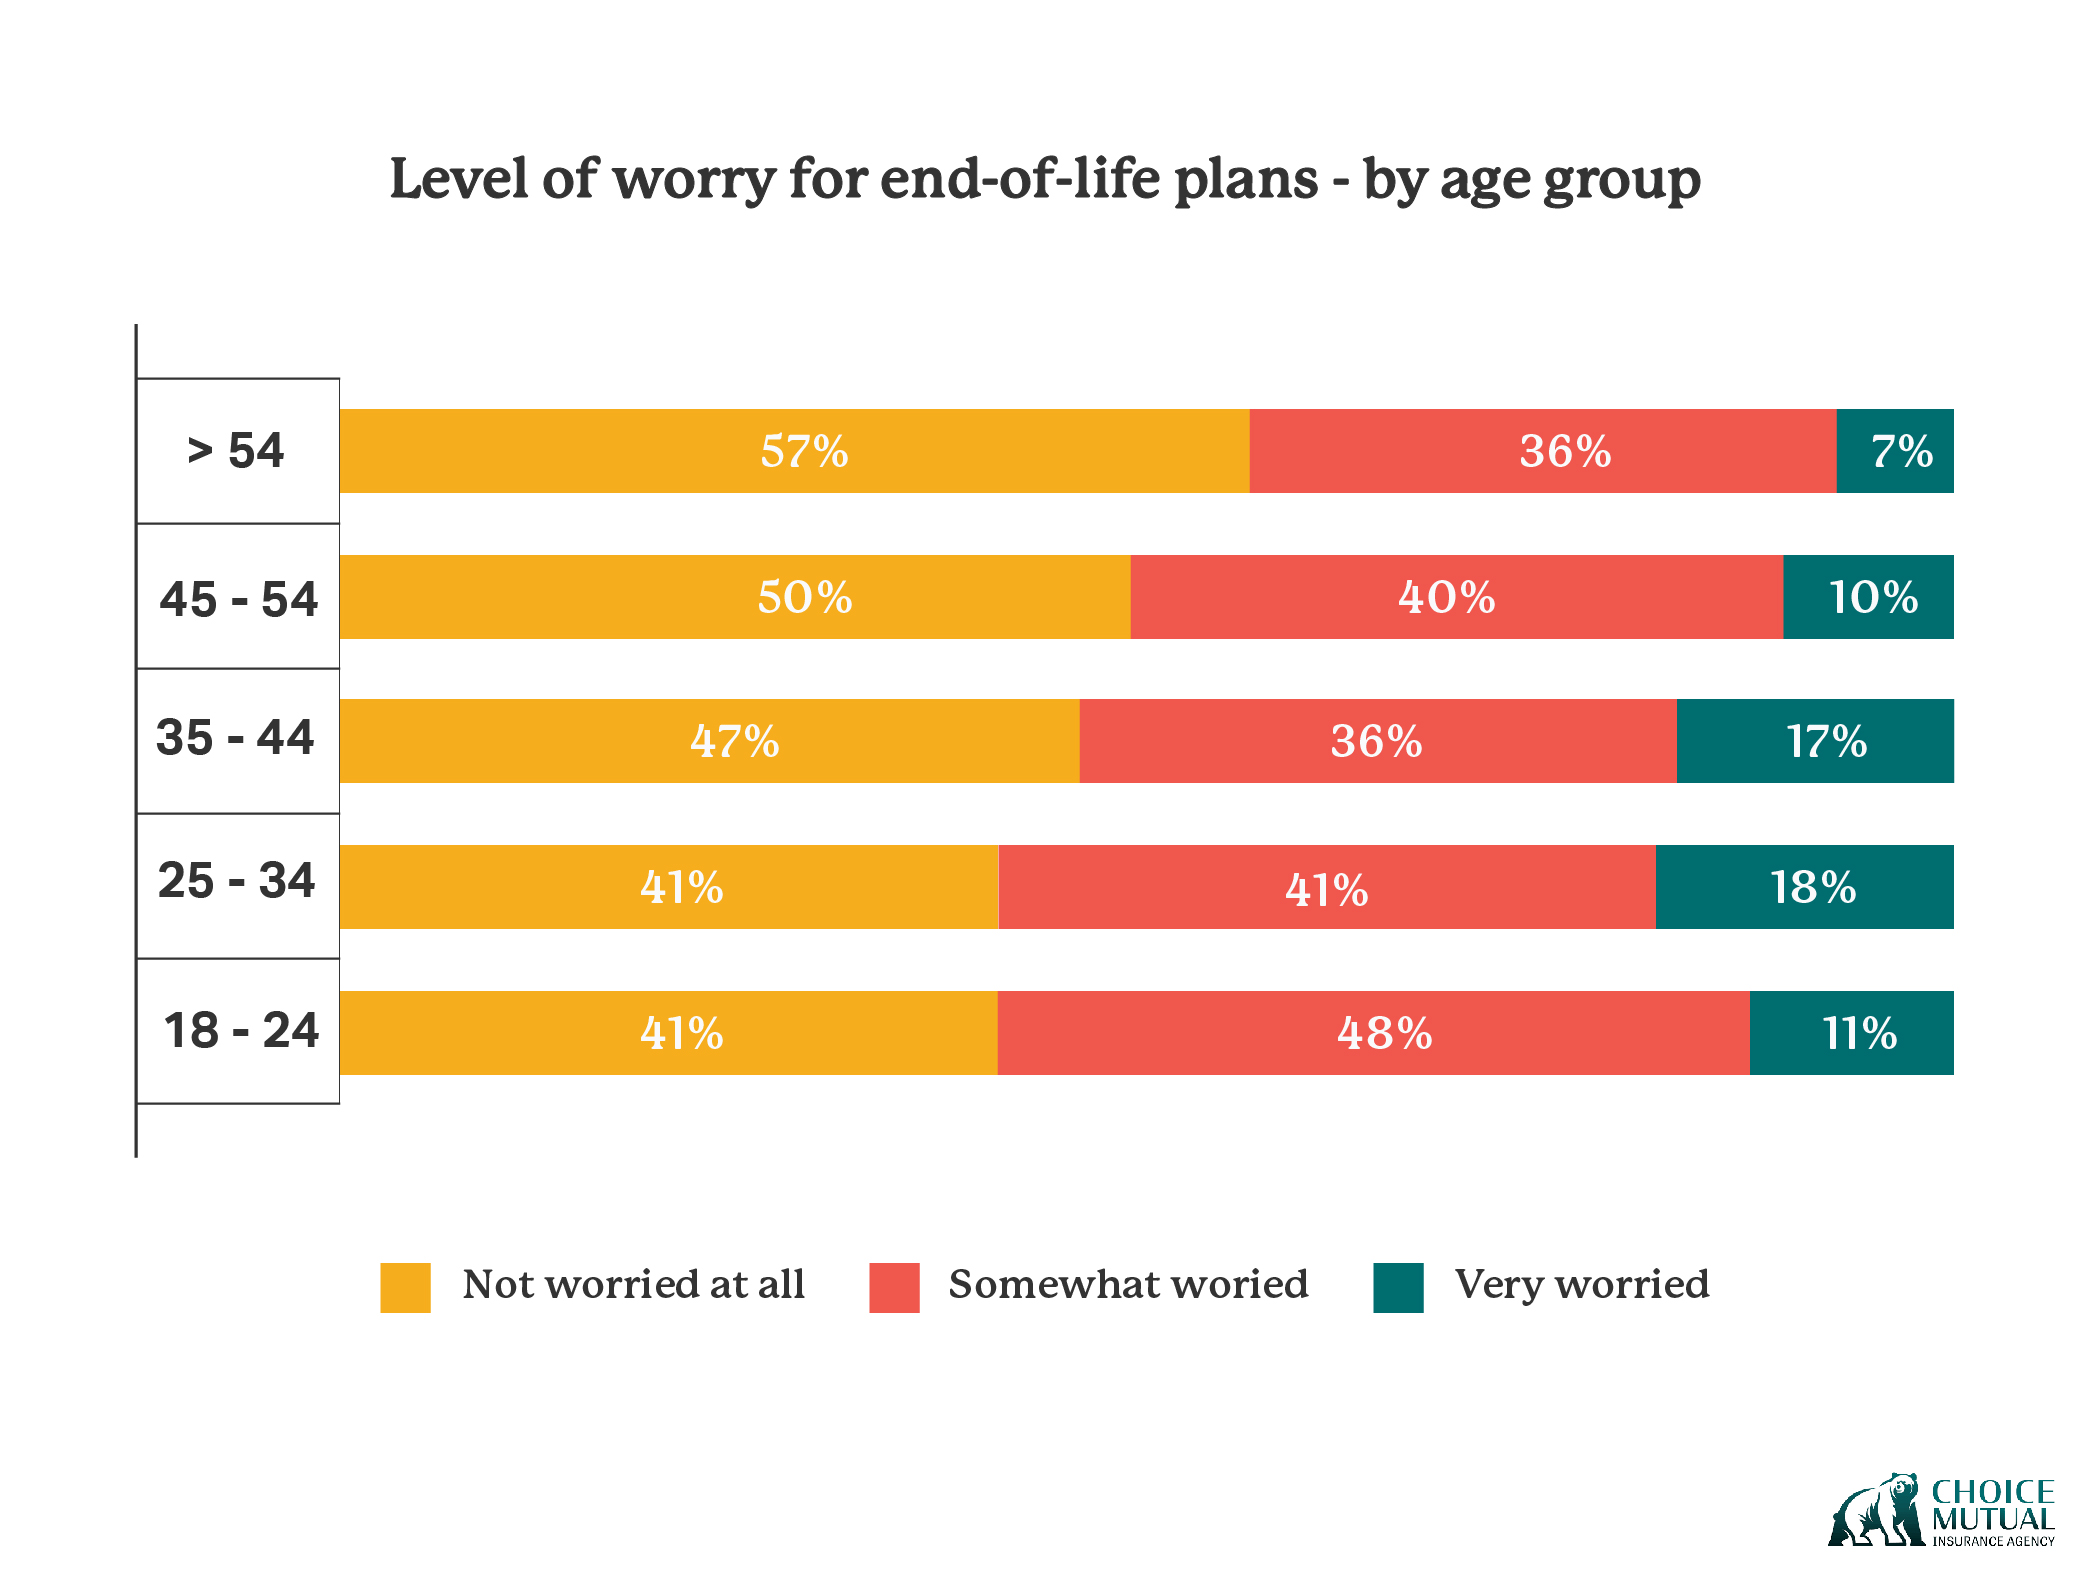 A chart showing which age groups are most worried about end-of-life planning